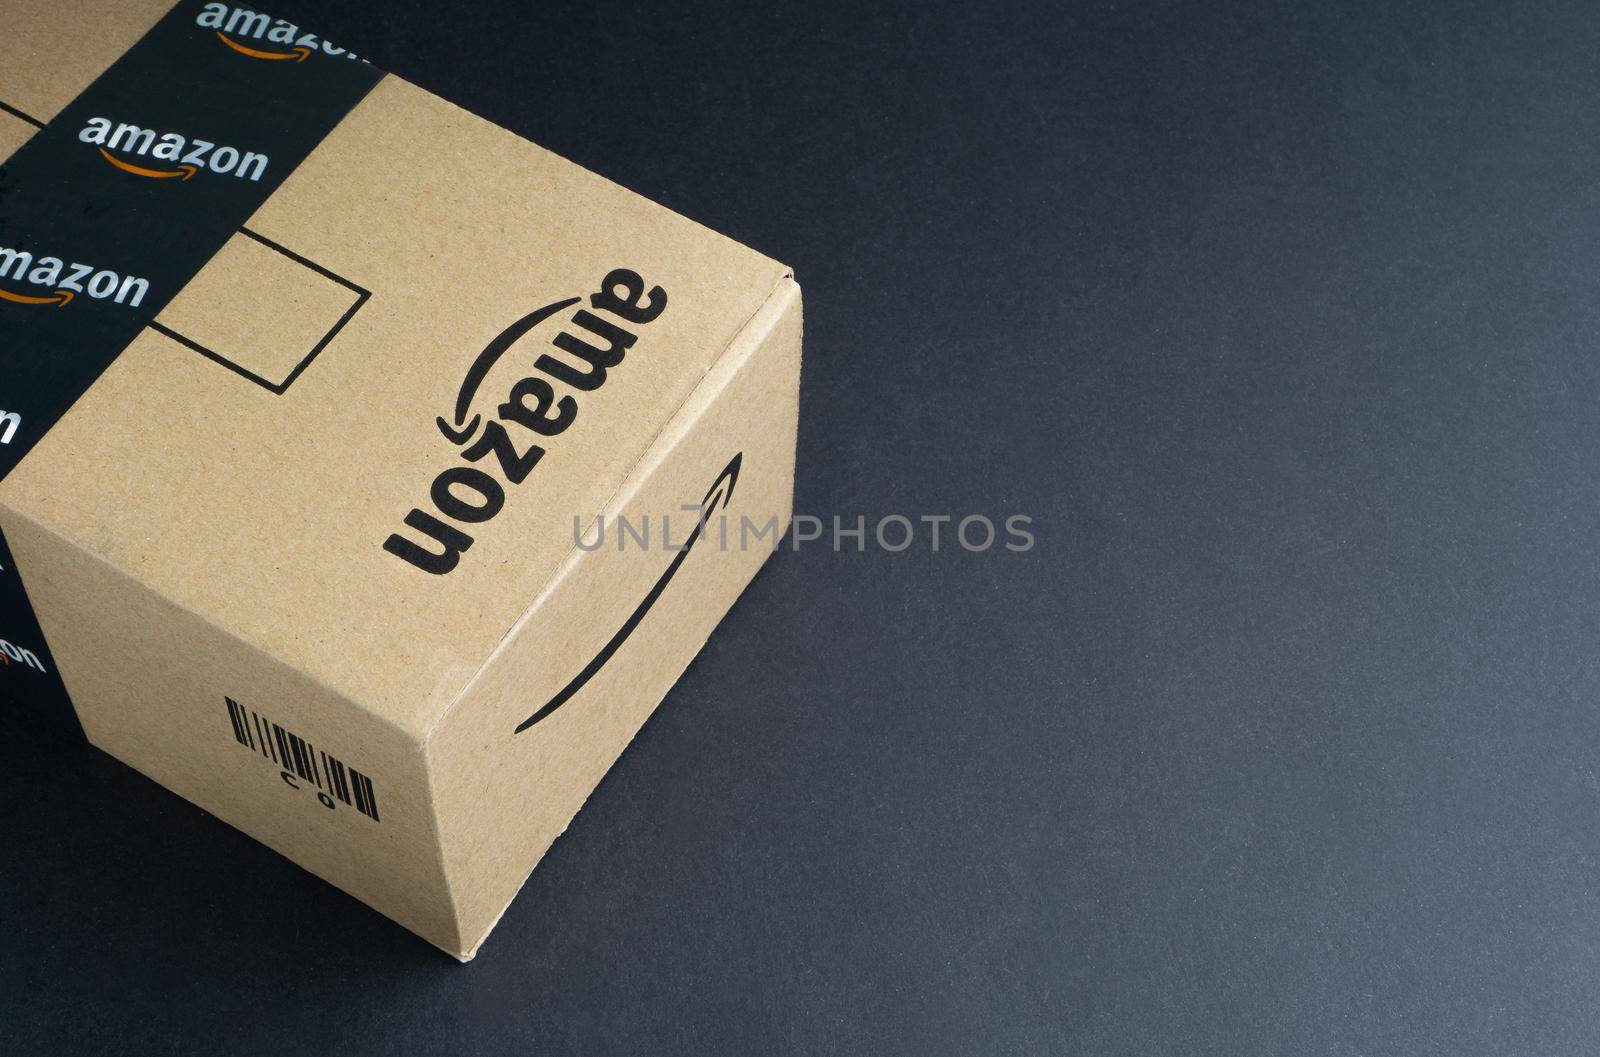 Amazon Prime box or Amazon shipping box on black background by silverwings